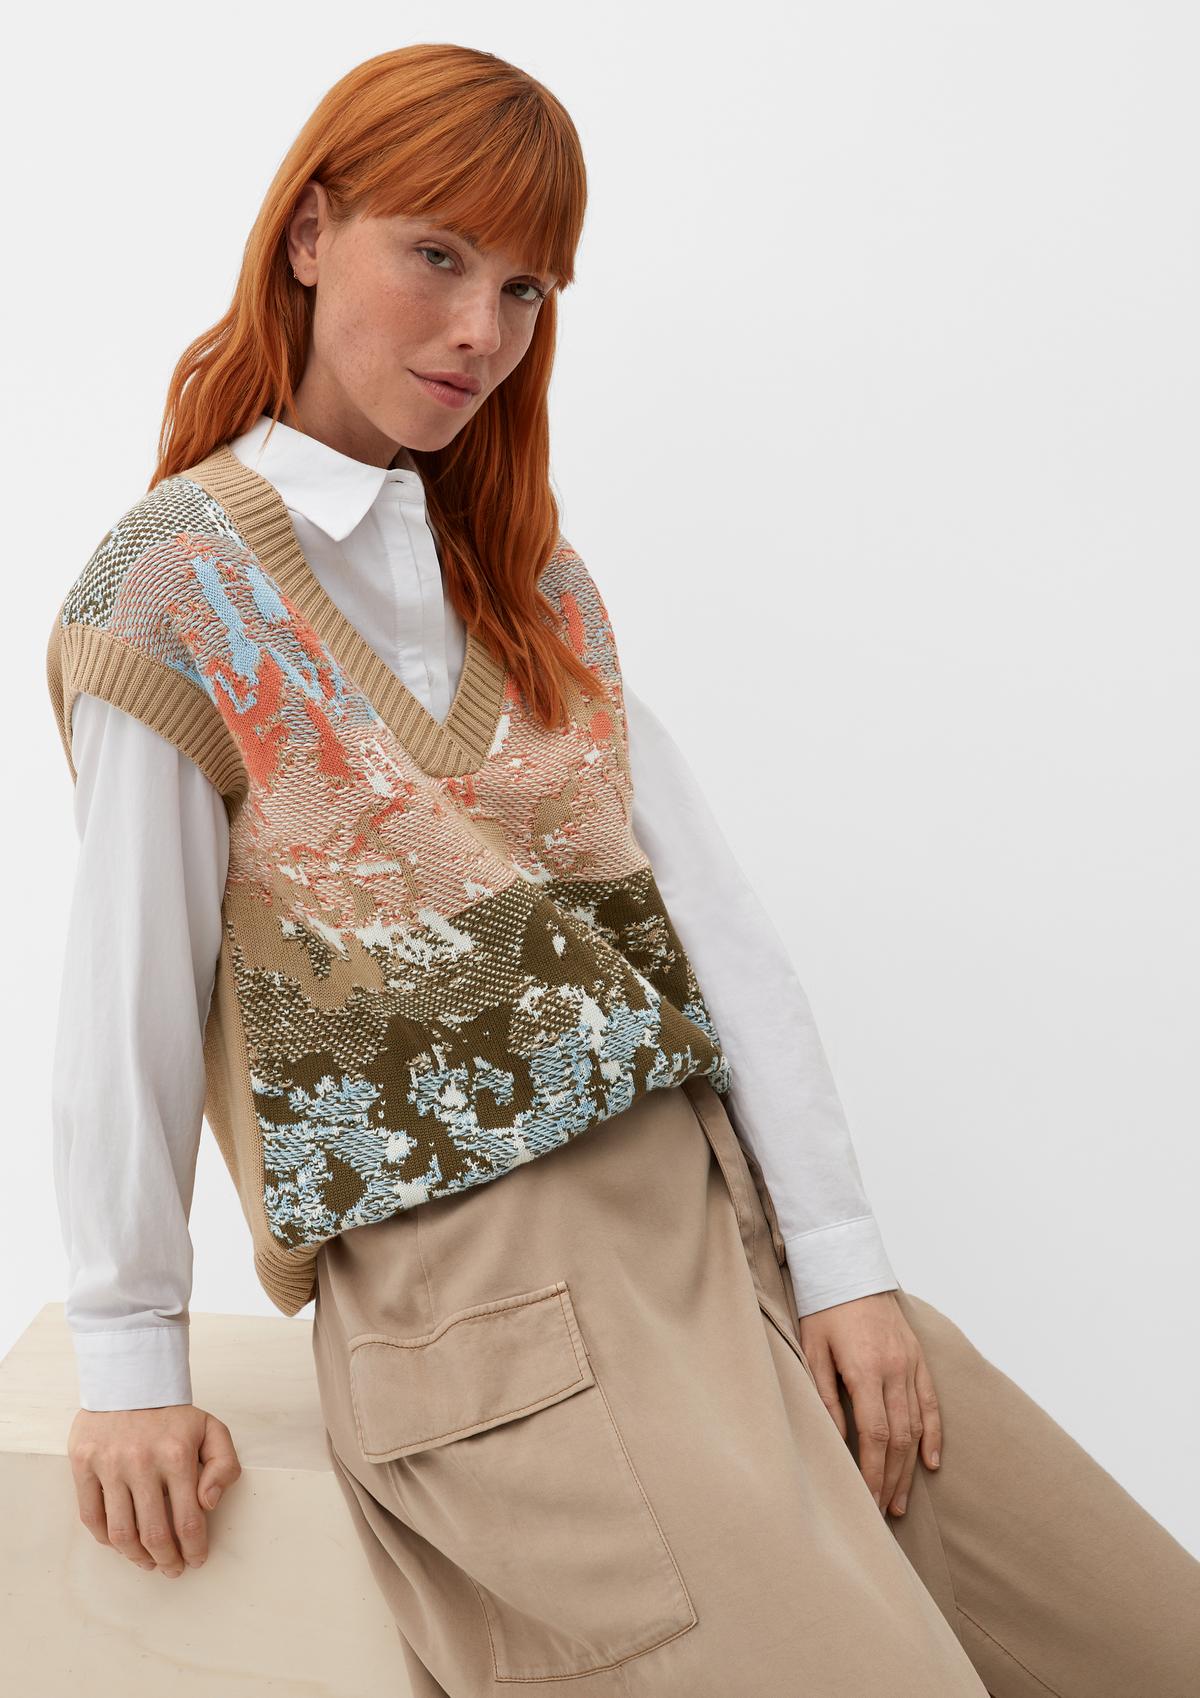 Sleeveless jumper with an abstract pattern